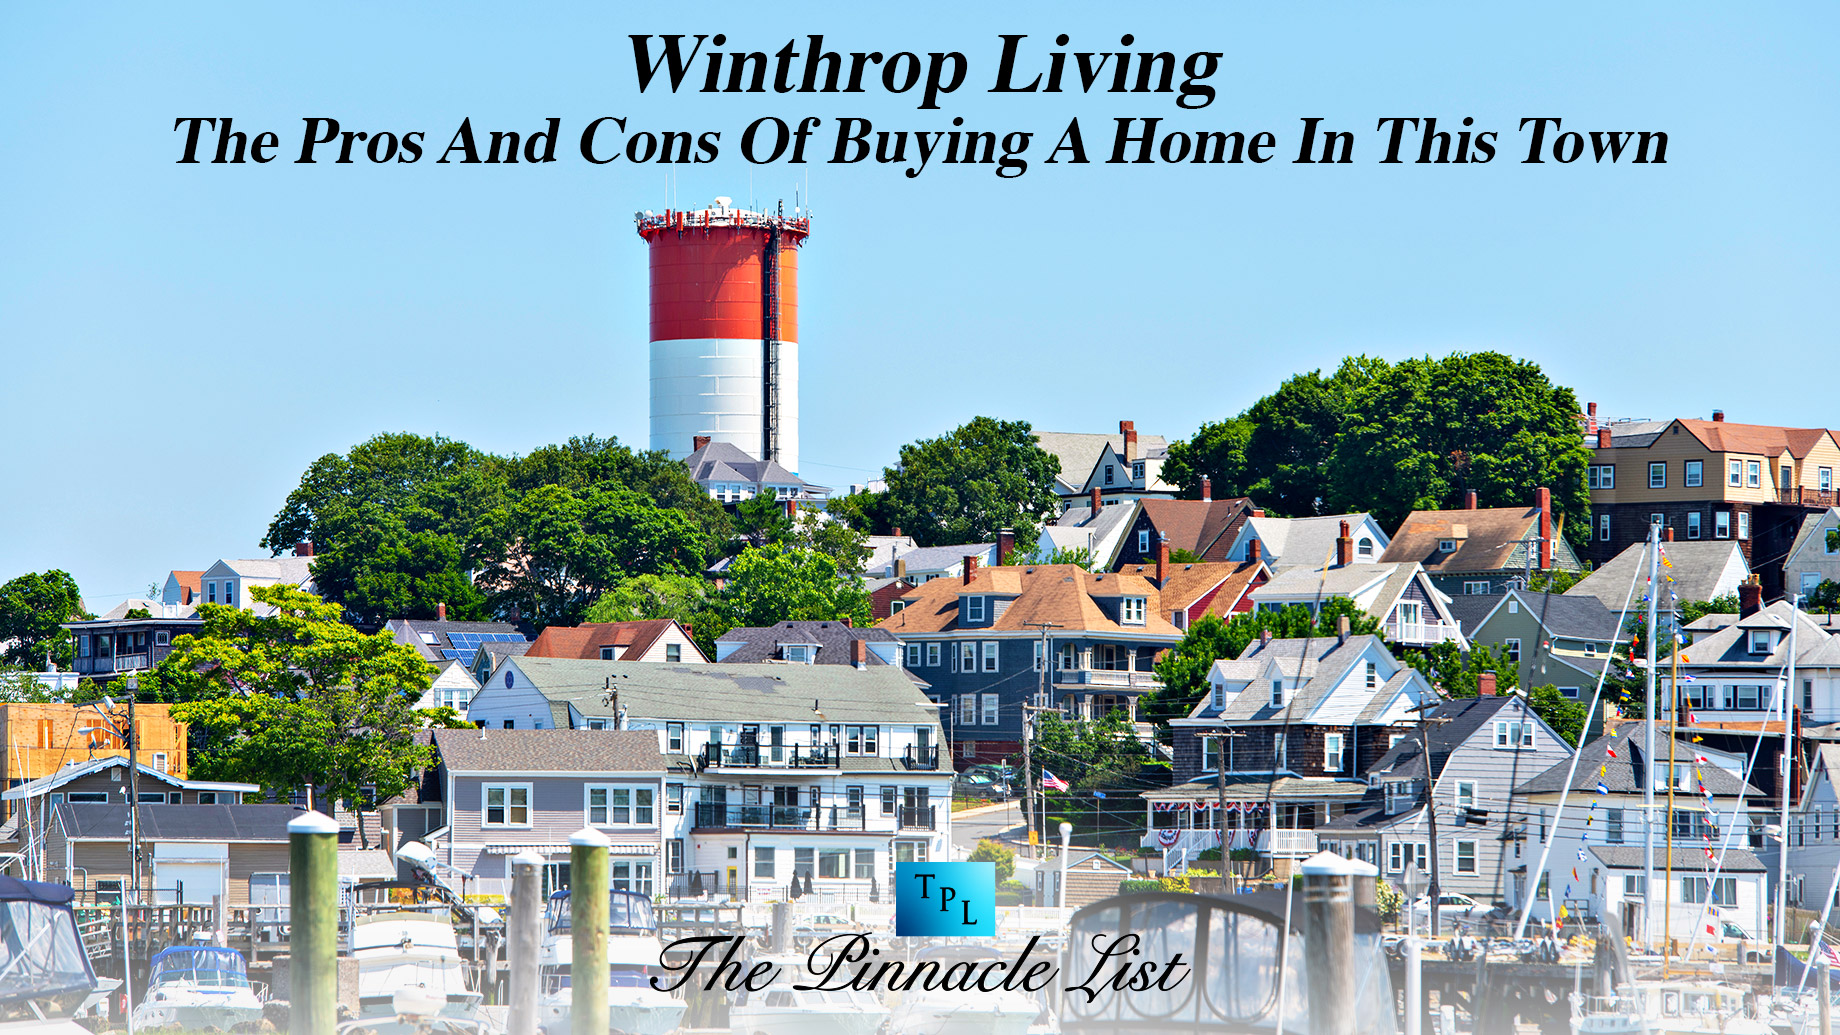 Winthrop Living: The Pros And Cons Of Buying A Home In This Town